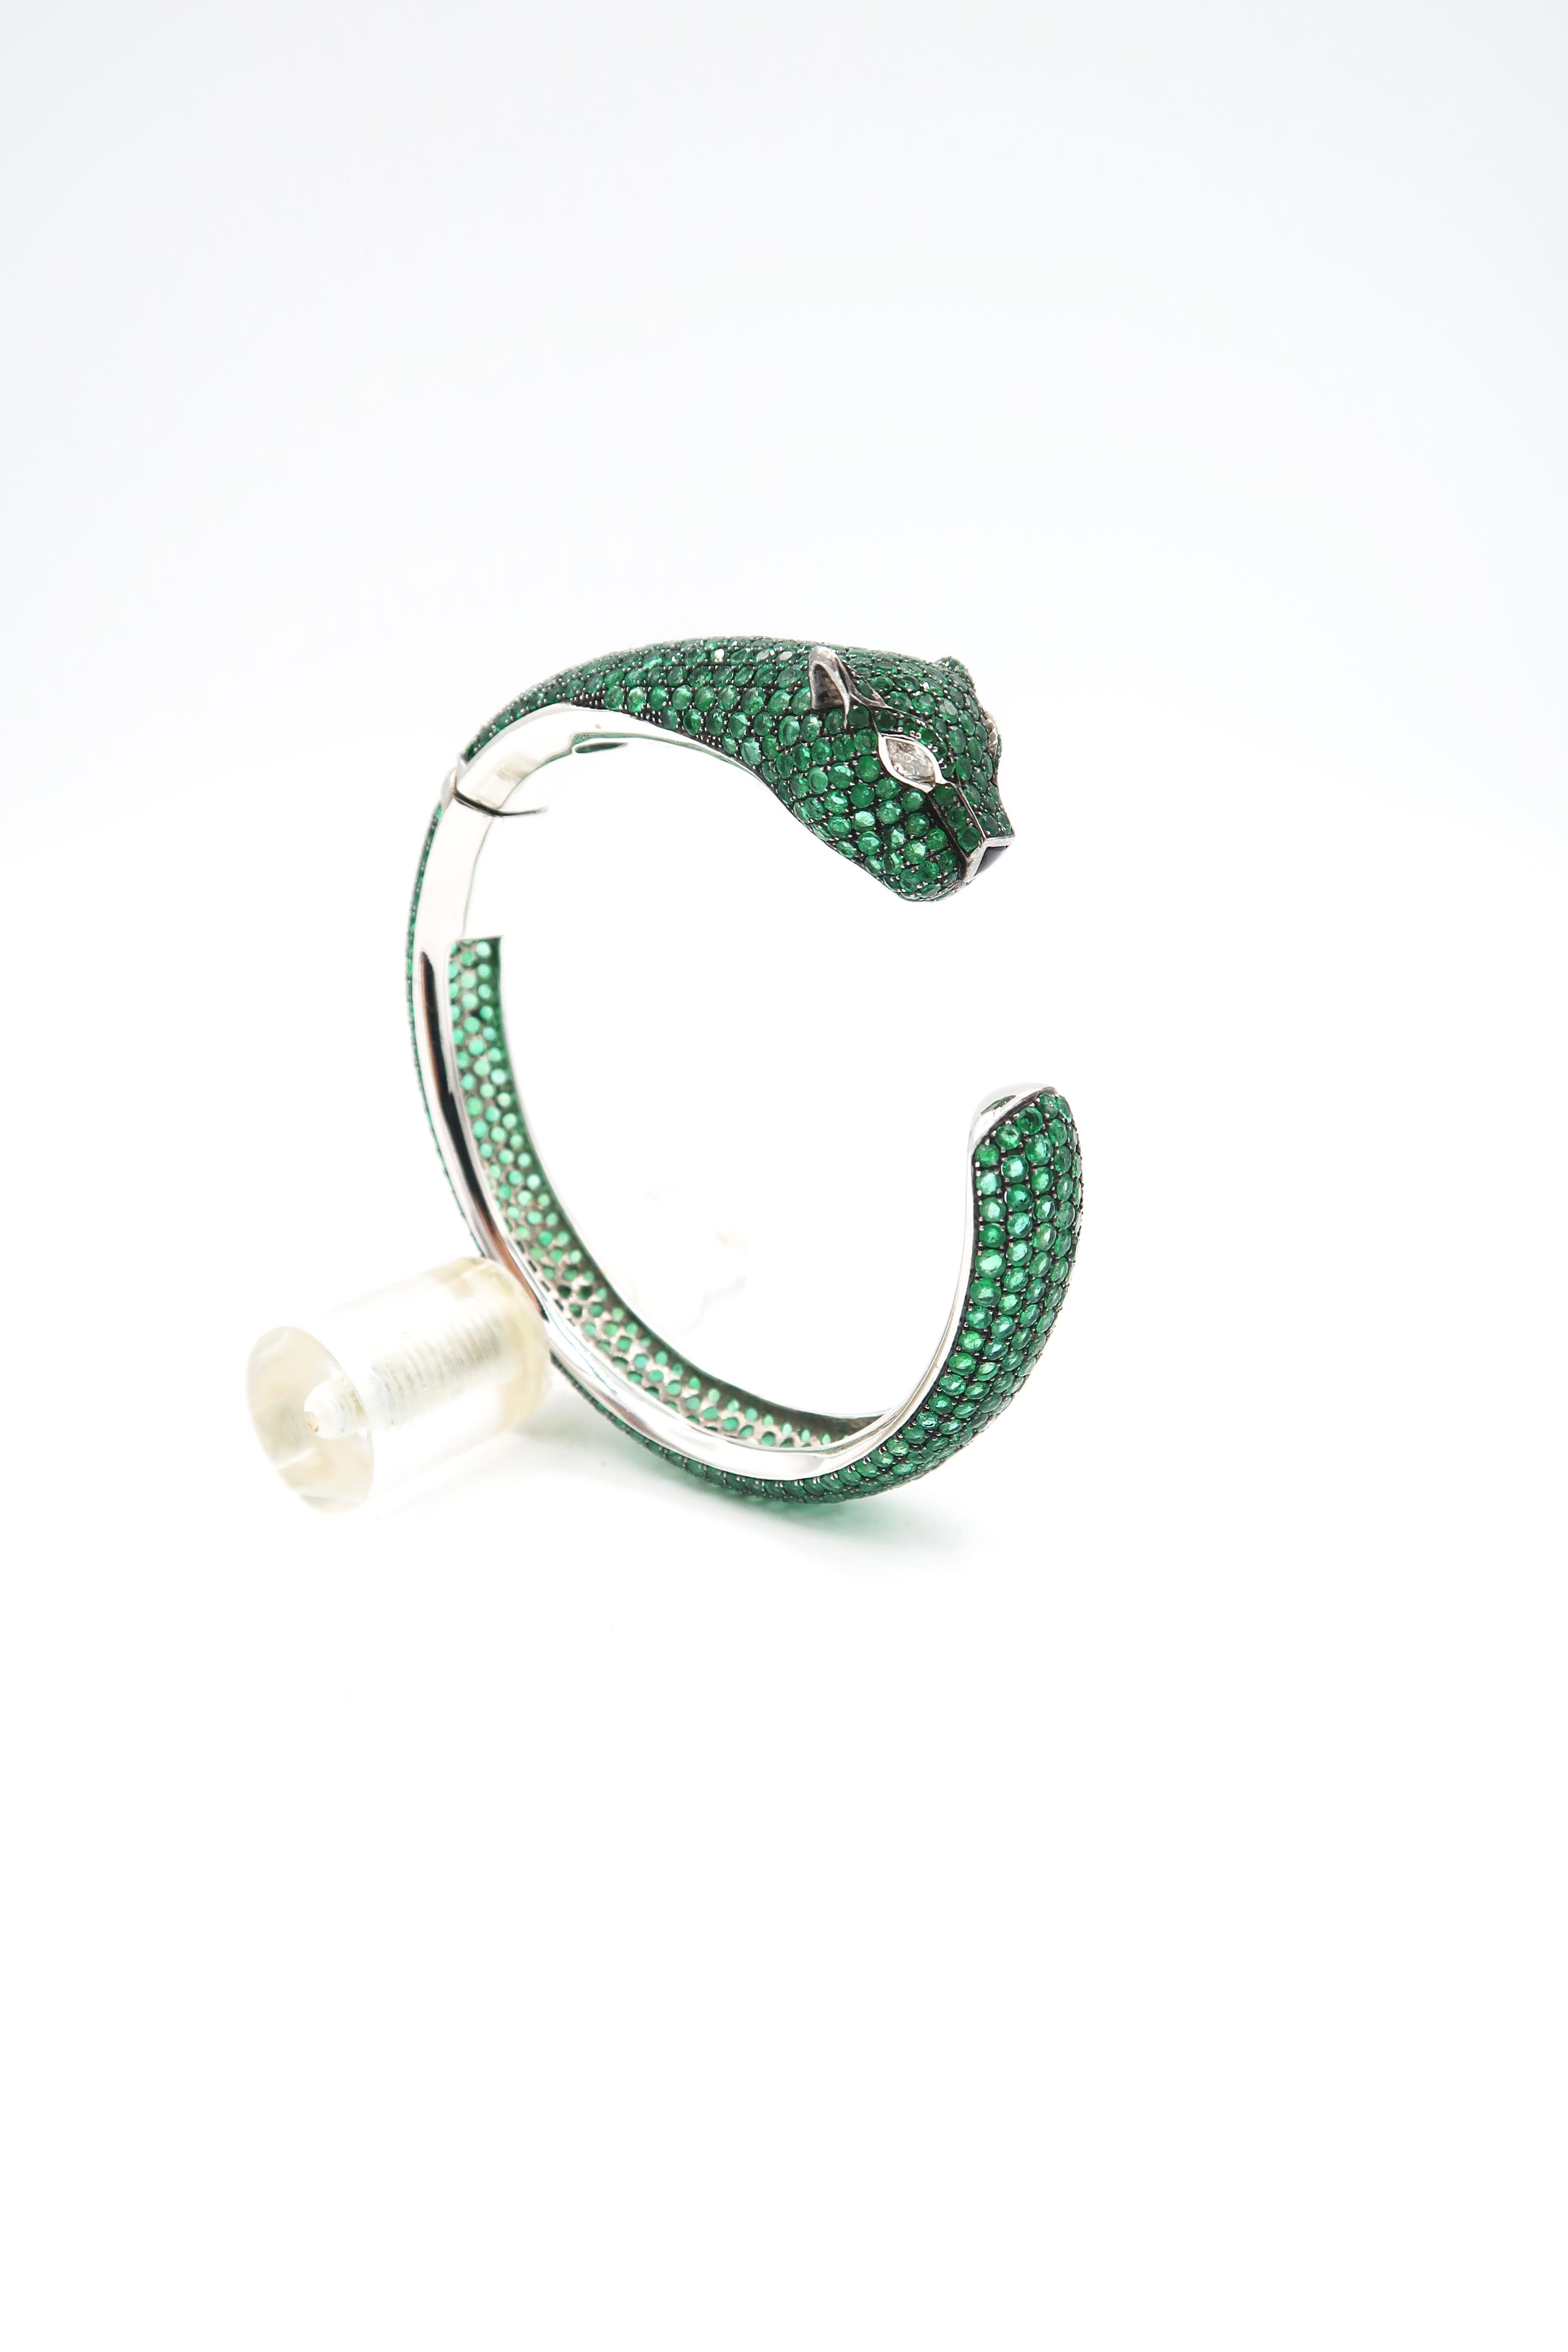 Emerald Panther Bangle in 18K White Gold with Diamond and Onyx

Gold: 18K White Gold 61.565g.
Diamond: 0.21ct.
Emerald: 28.01ct.